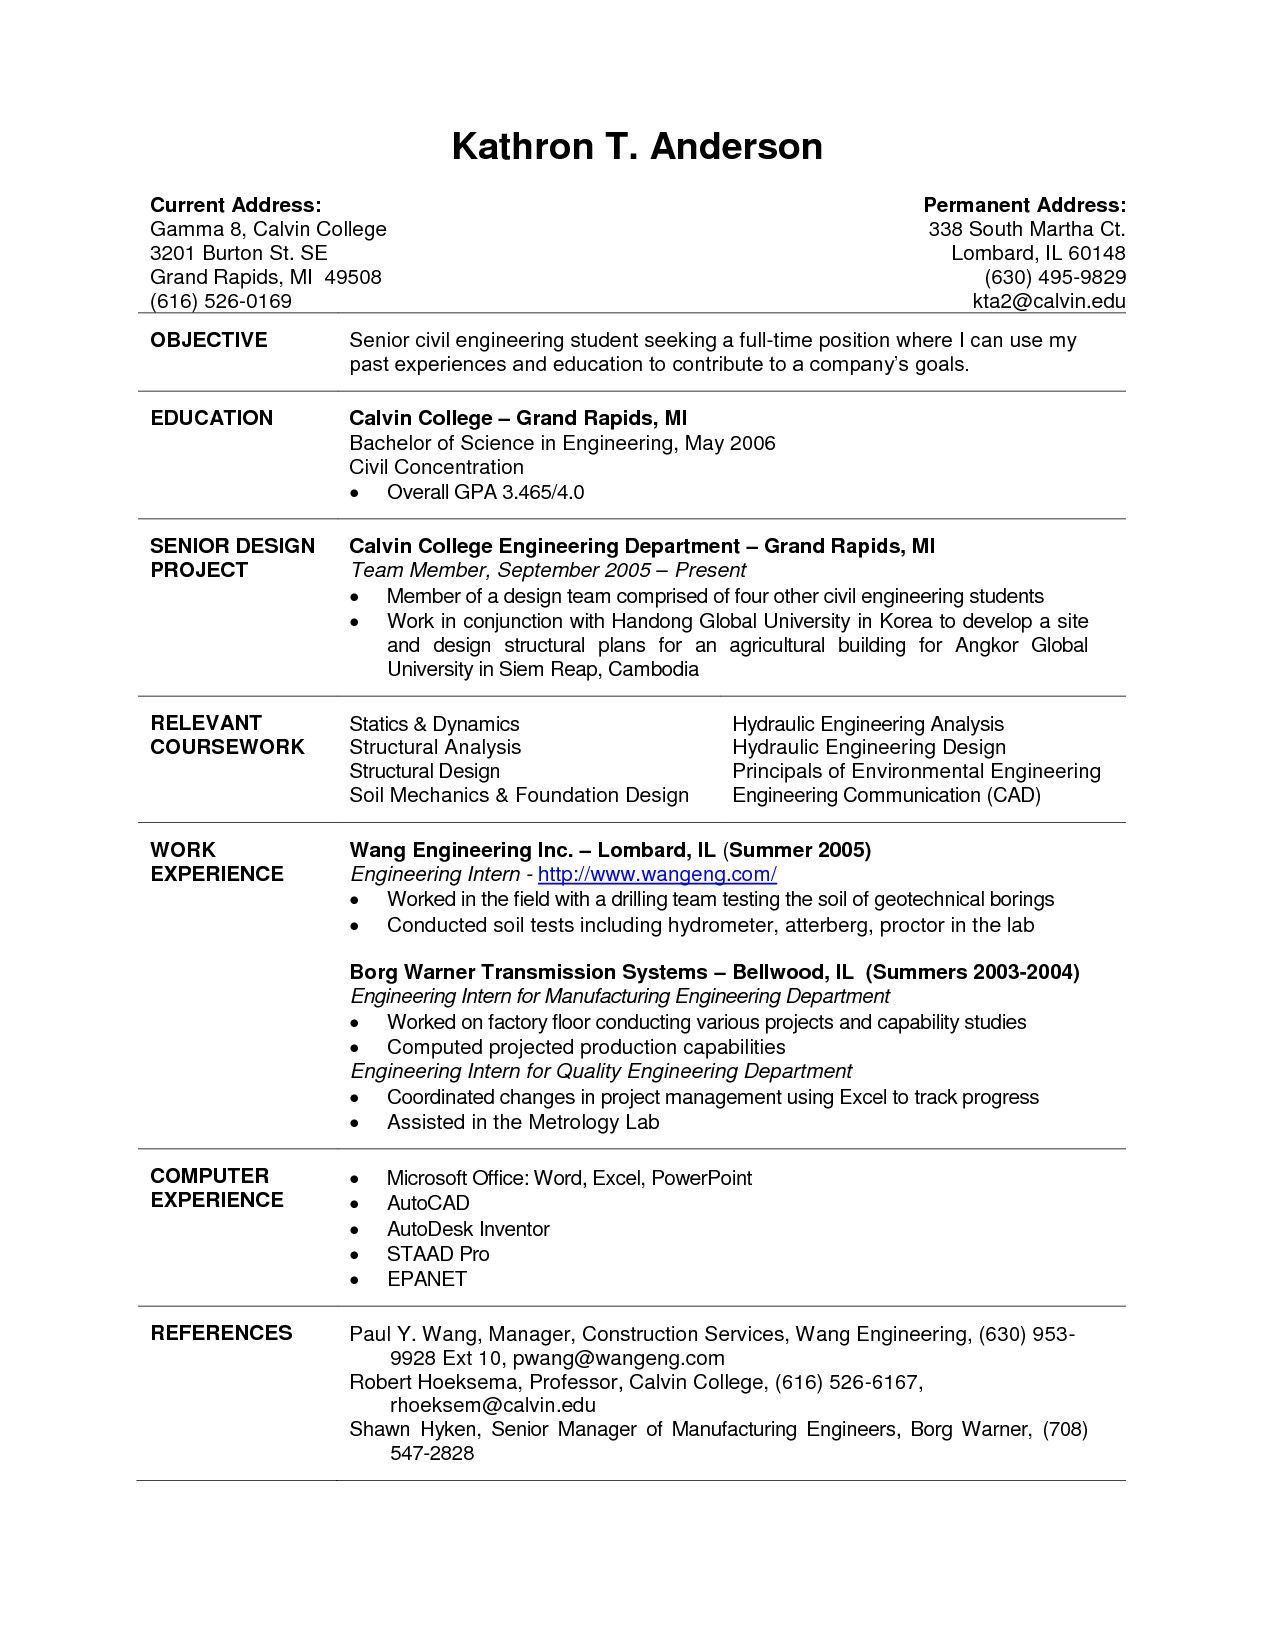 Sample Resume Templates for College Students Resume Examples College Students Little Experience In 2021 …